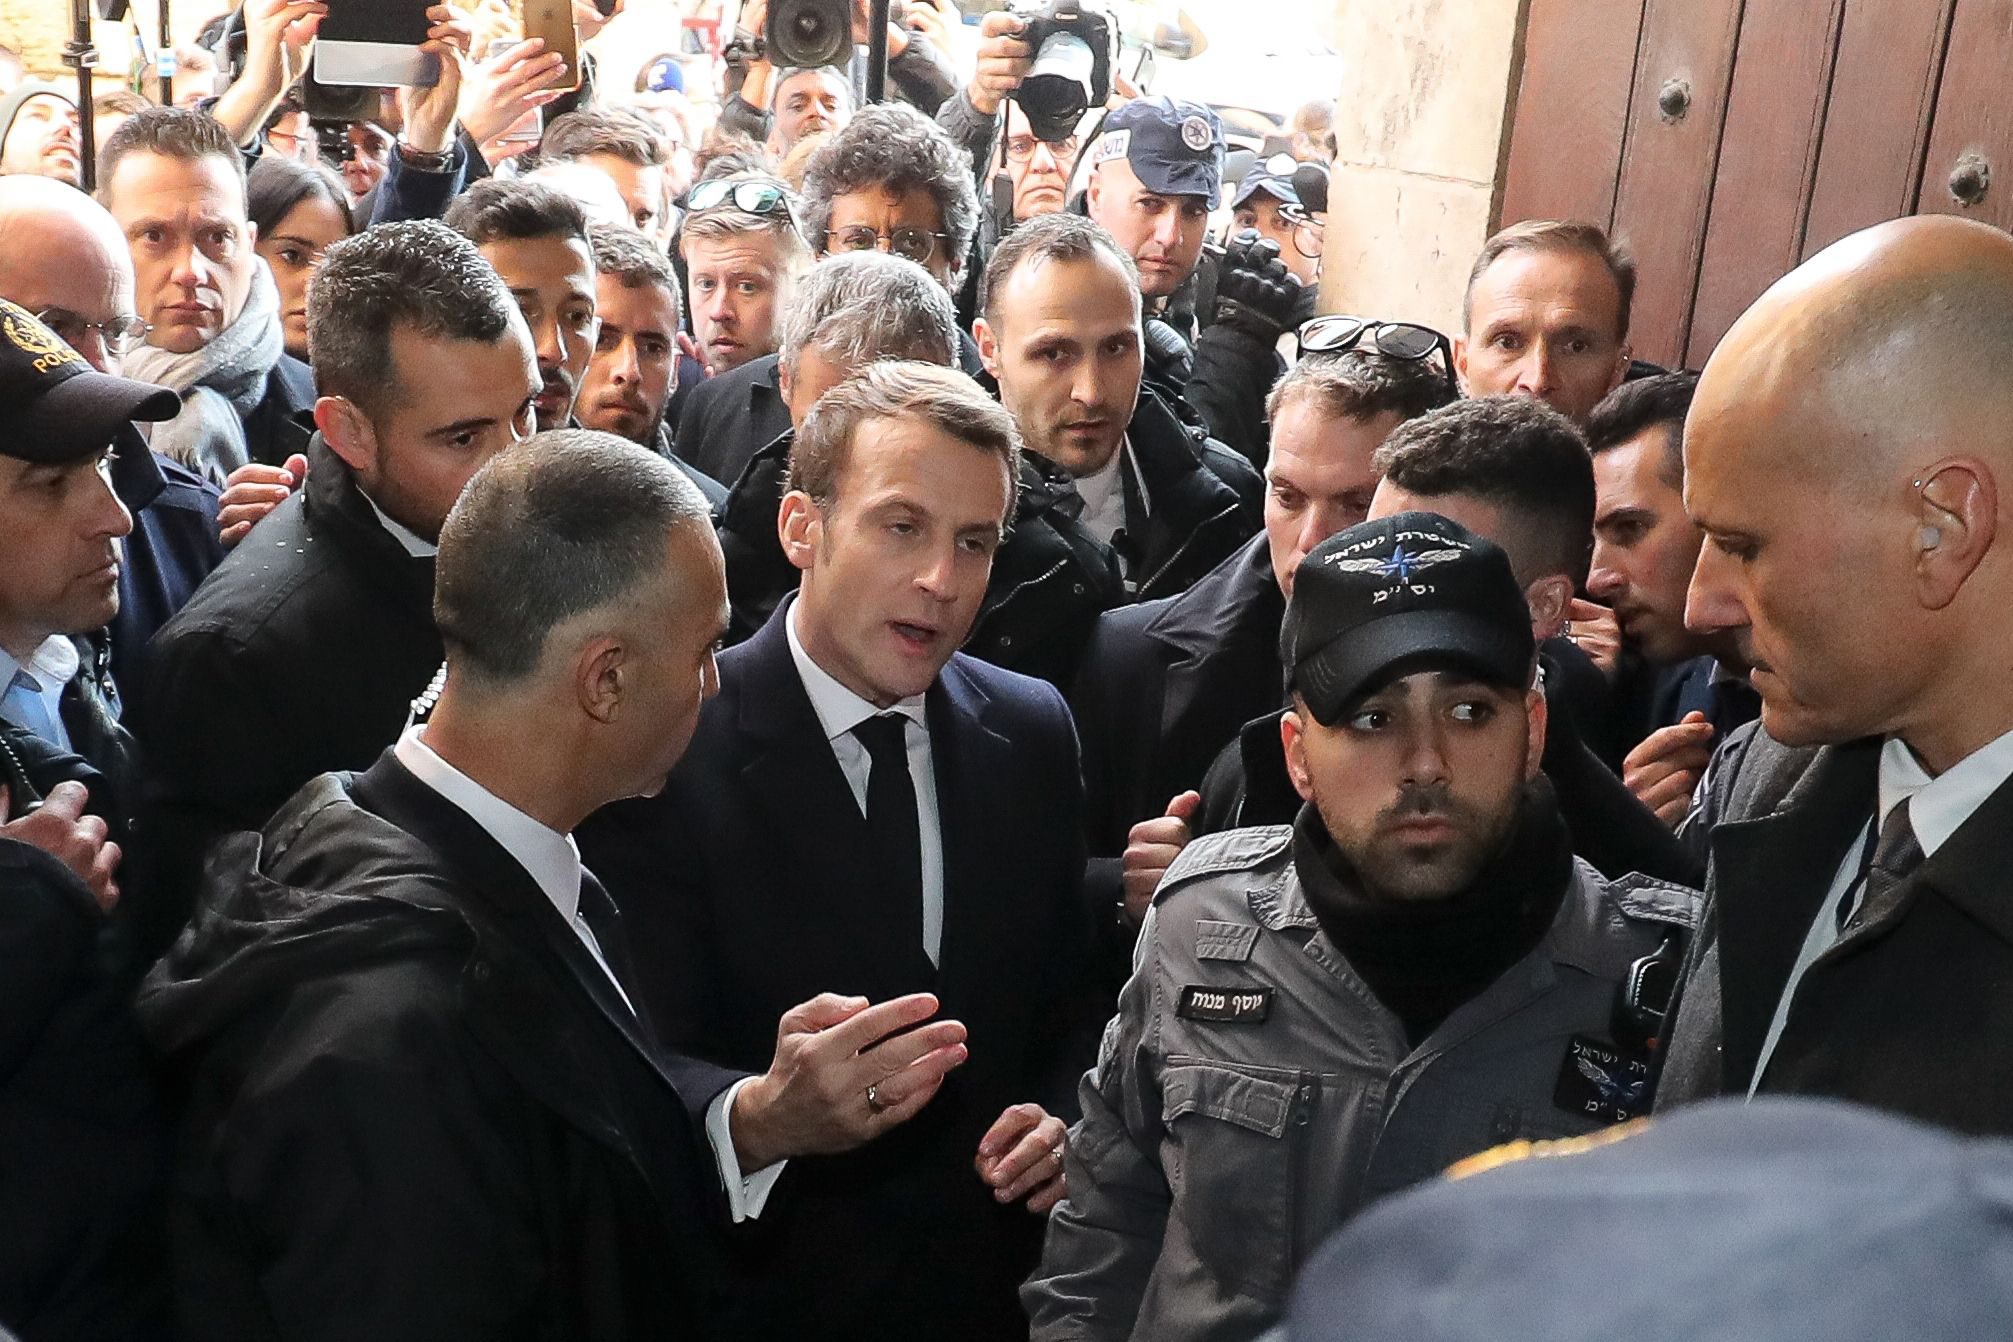 French President Emmanuel Macron asks the Israeli police to leave the 12th-century Church of Saint Anne in the old city of Jerusalem on January 22, 2020. - World leaders are to travel to Israel this week to mark 75 years since the Red Army liberated Auschwitz, the extermination camp where the Nazis killed over a million Jews. Thousands of police officers and other security forces will deploy from today, ahead of the arrival of dignitaries including Russian President Vladimir Putin, French President Emmanuel Macron and US Vice President Mike Pence. (Photo by Ludovic Marin / AFP)